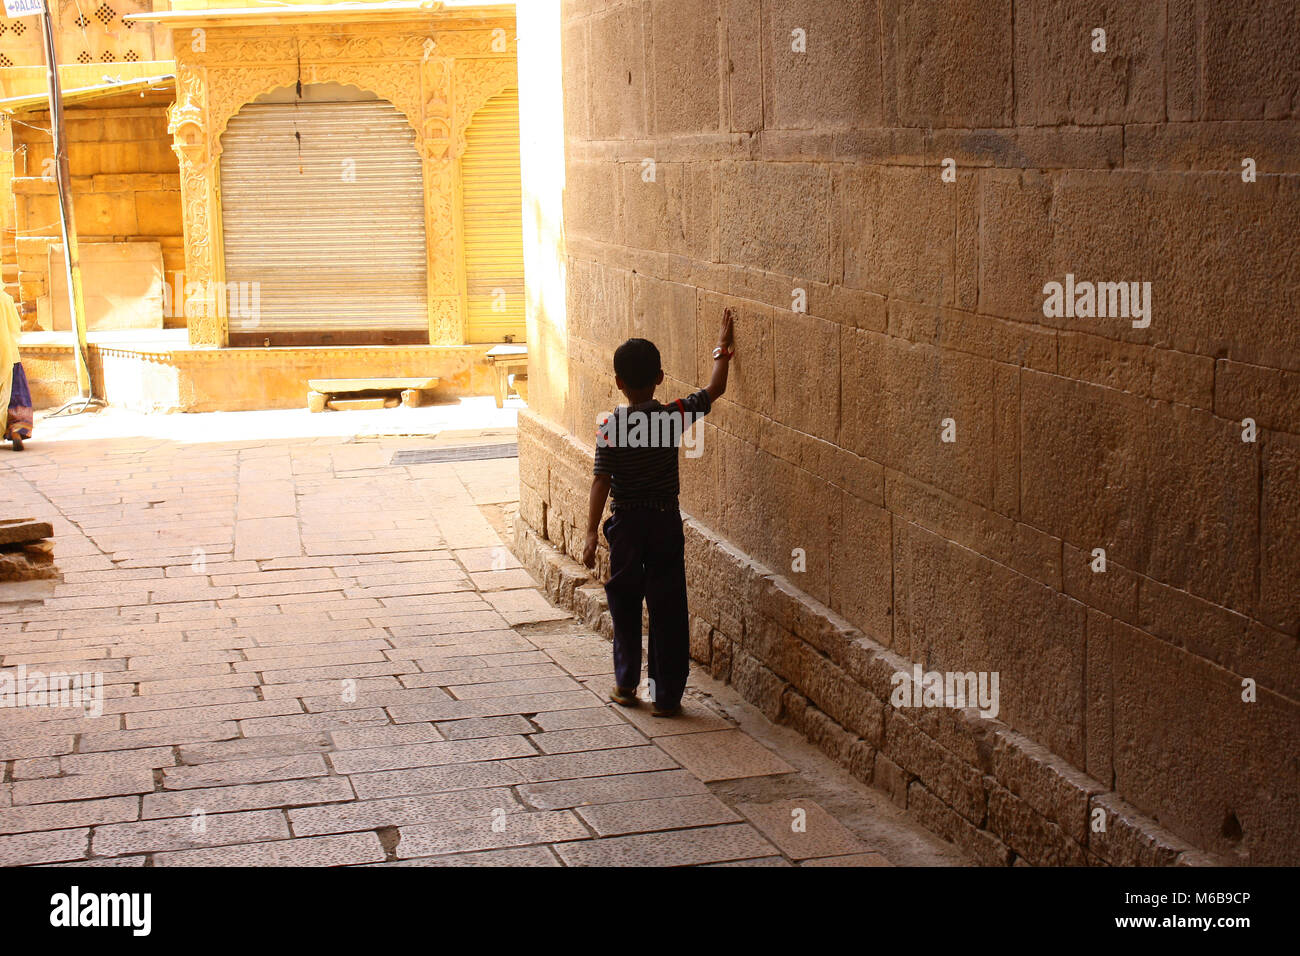 Black silhouette of a little boy walking through an archway into a sunny street, sweeping with one hand along the massive stone wall. Rajastan, India. Stock Photo